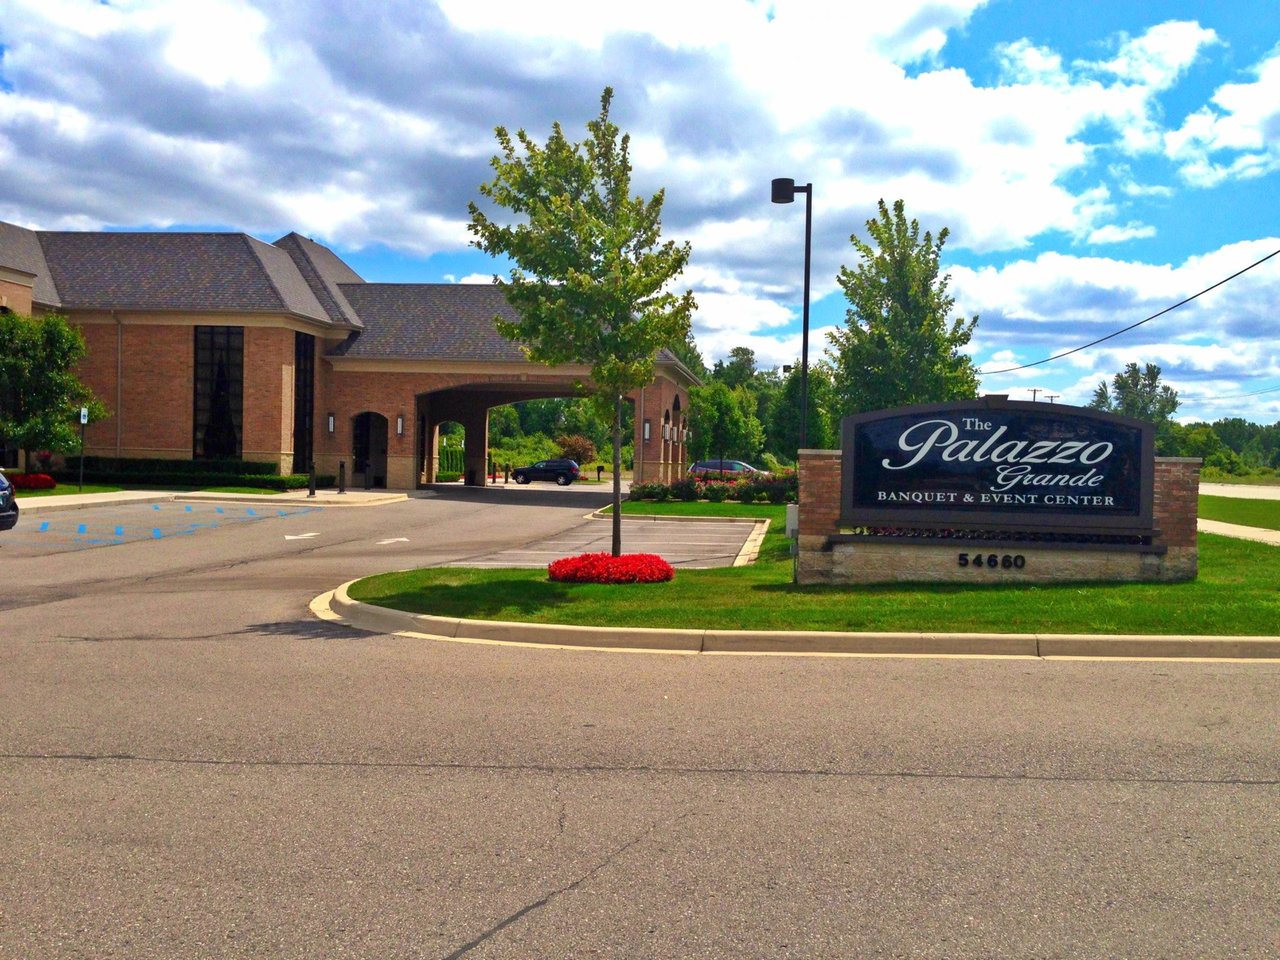 The Palazzo Grande Banquet Hall in Shelby Township, MI